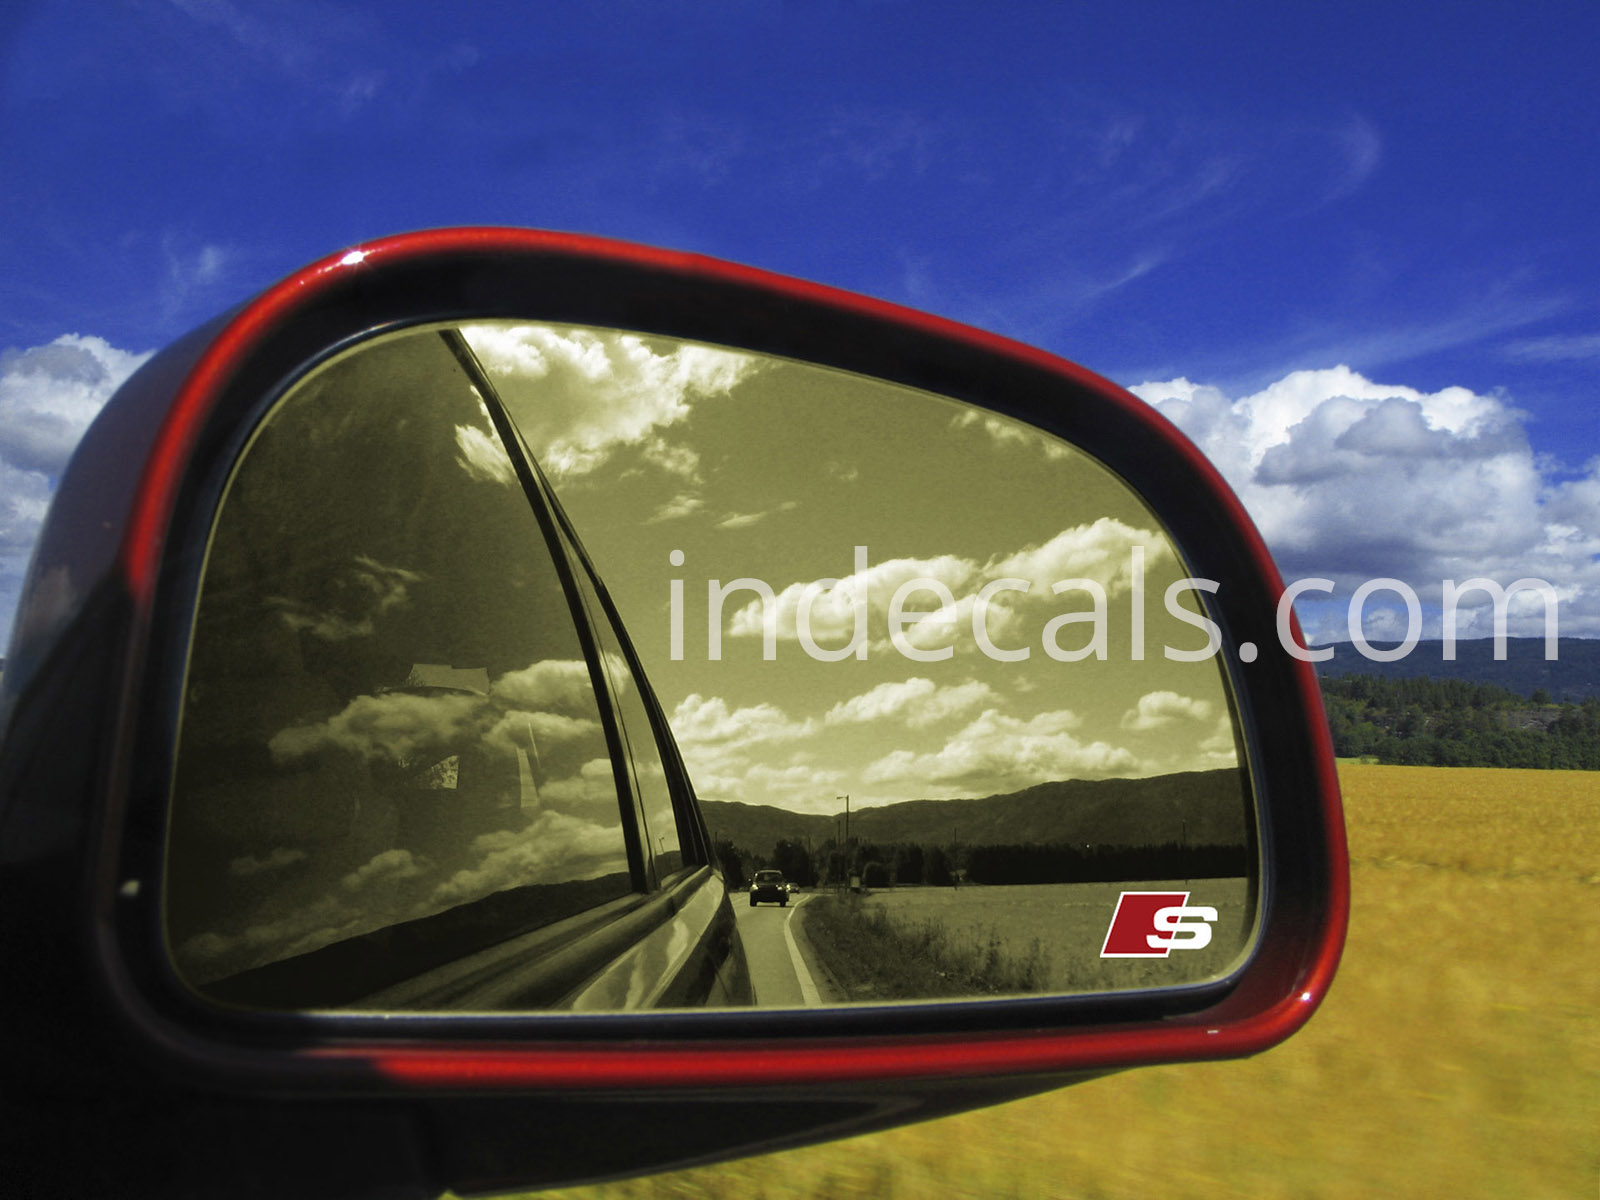 2 x Audi S-Line Stickers for Mirror - White + Red